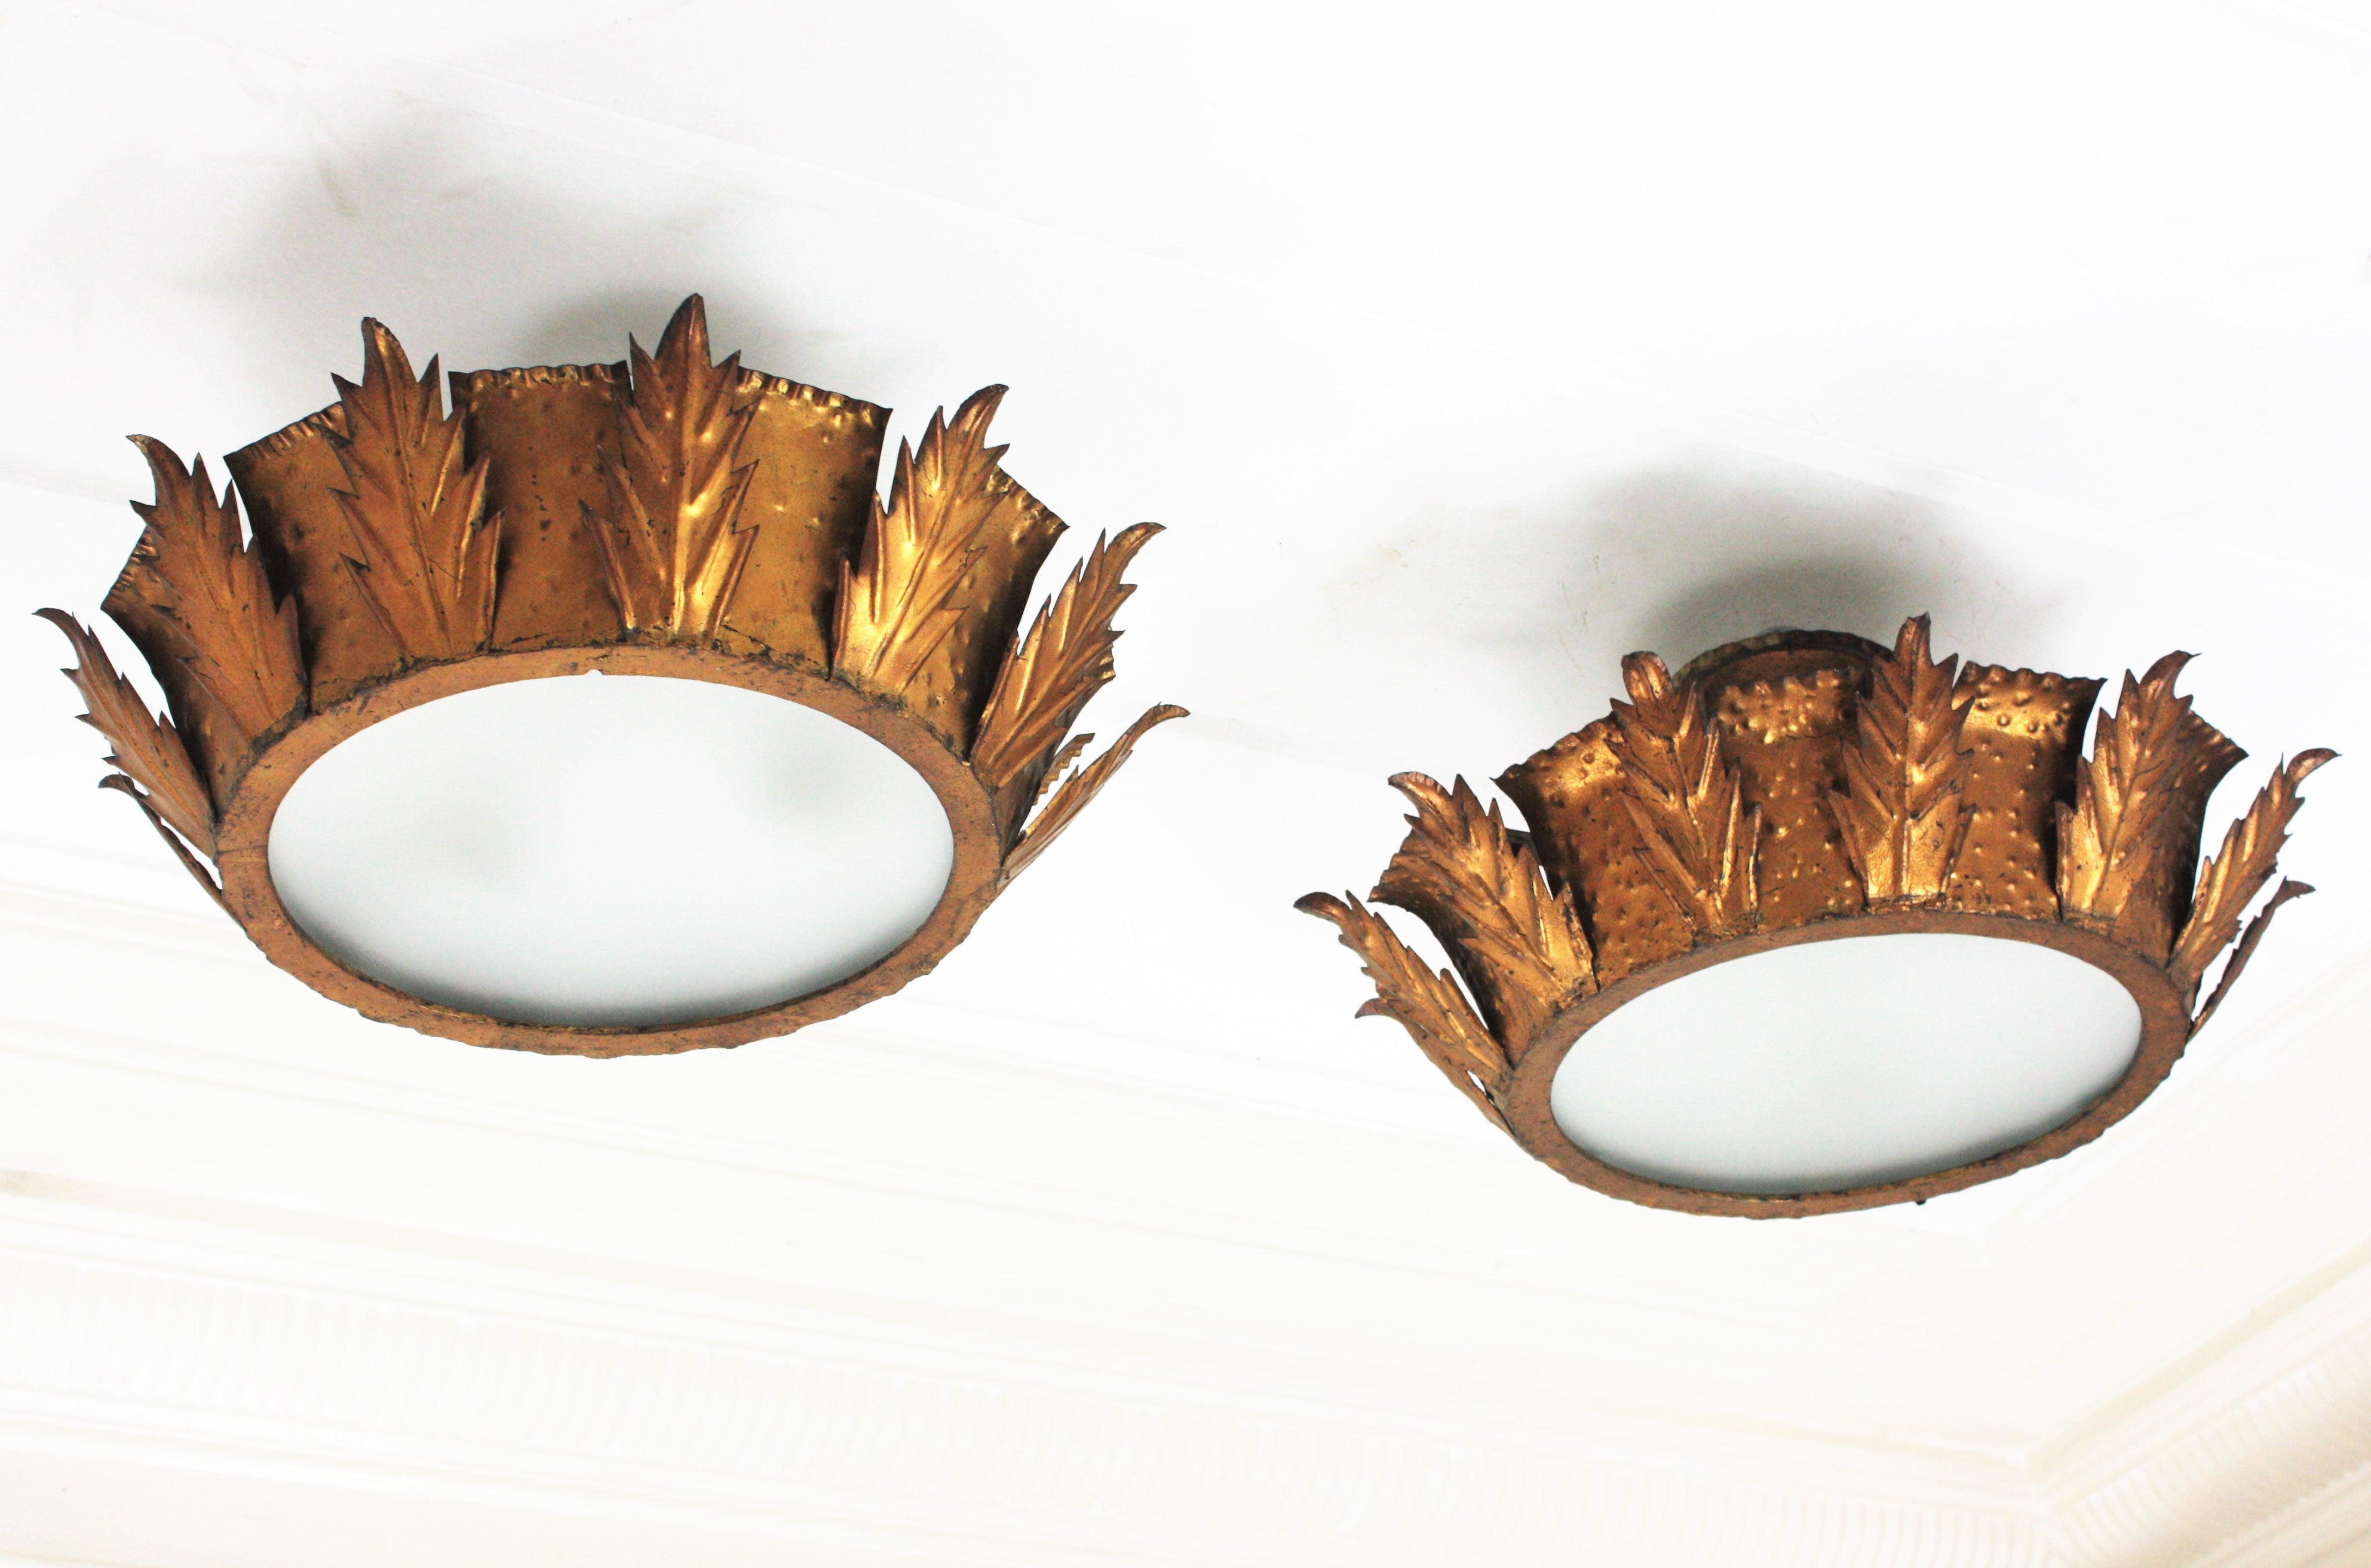 Pair of Sunburst crown flush mounts, gilt iron, frosted glass, Spain, 1950s.
Beautiful hand-hammered sunburst crown shape leafed flush mount ceiling light fixtures with frosted glass panel diffusers.
This pair of ceiling lights were handcrafted in